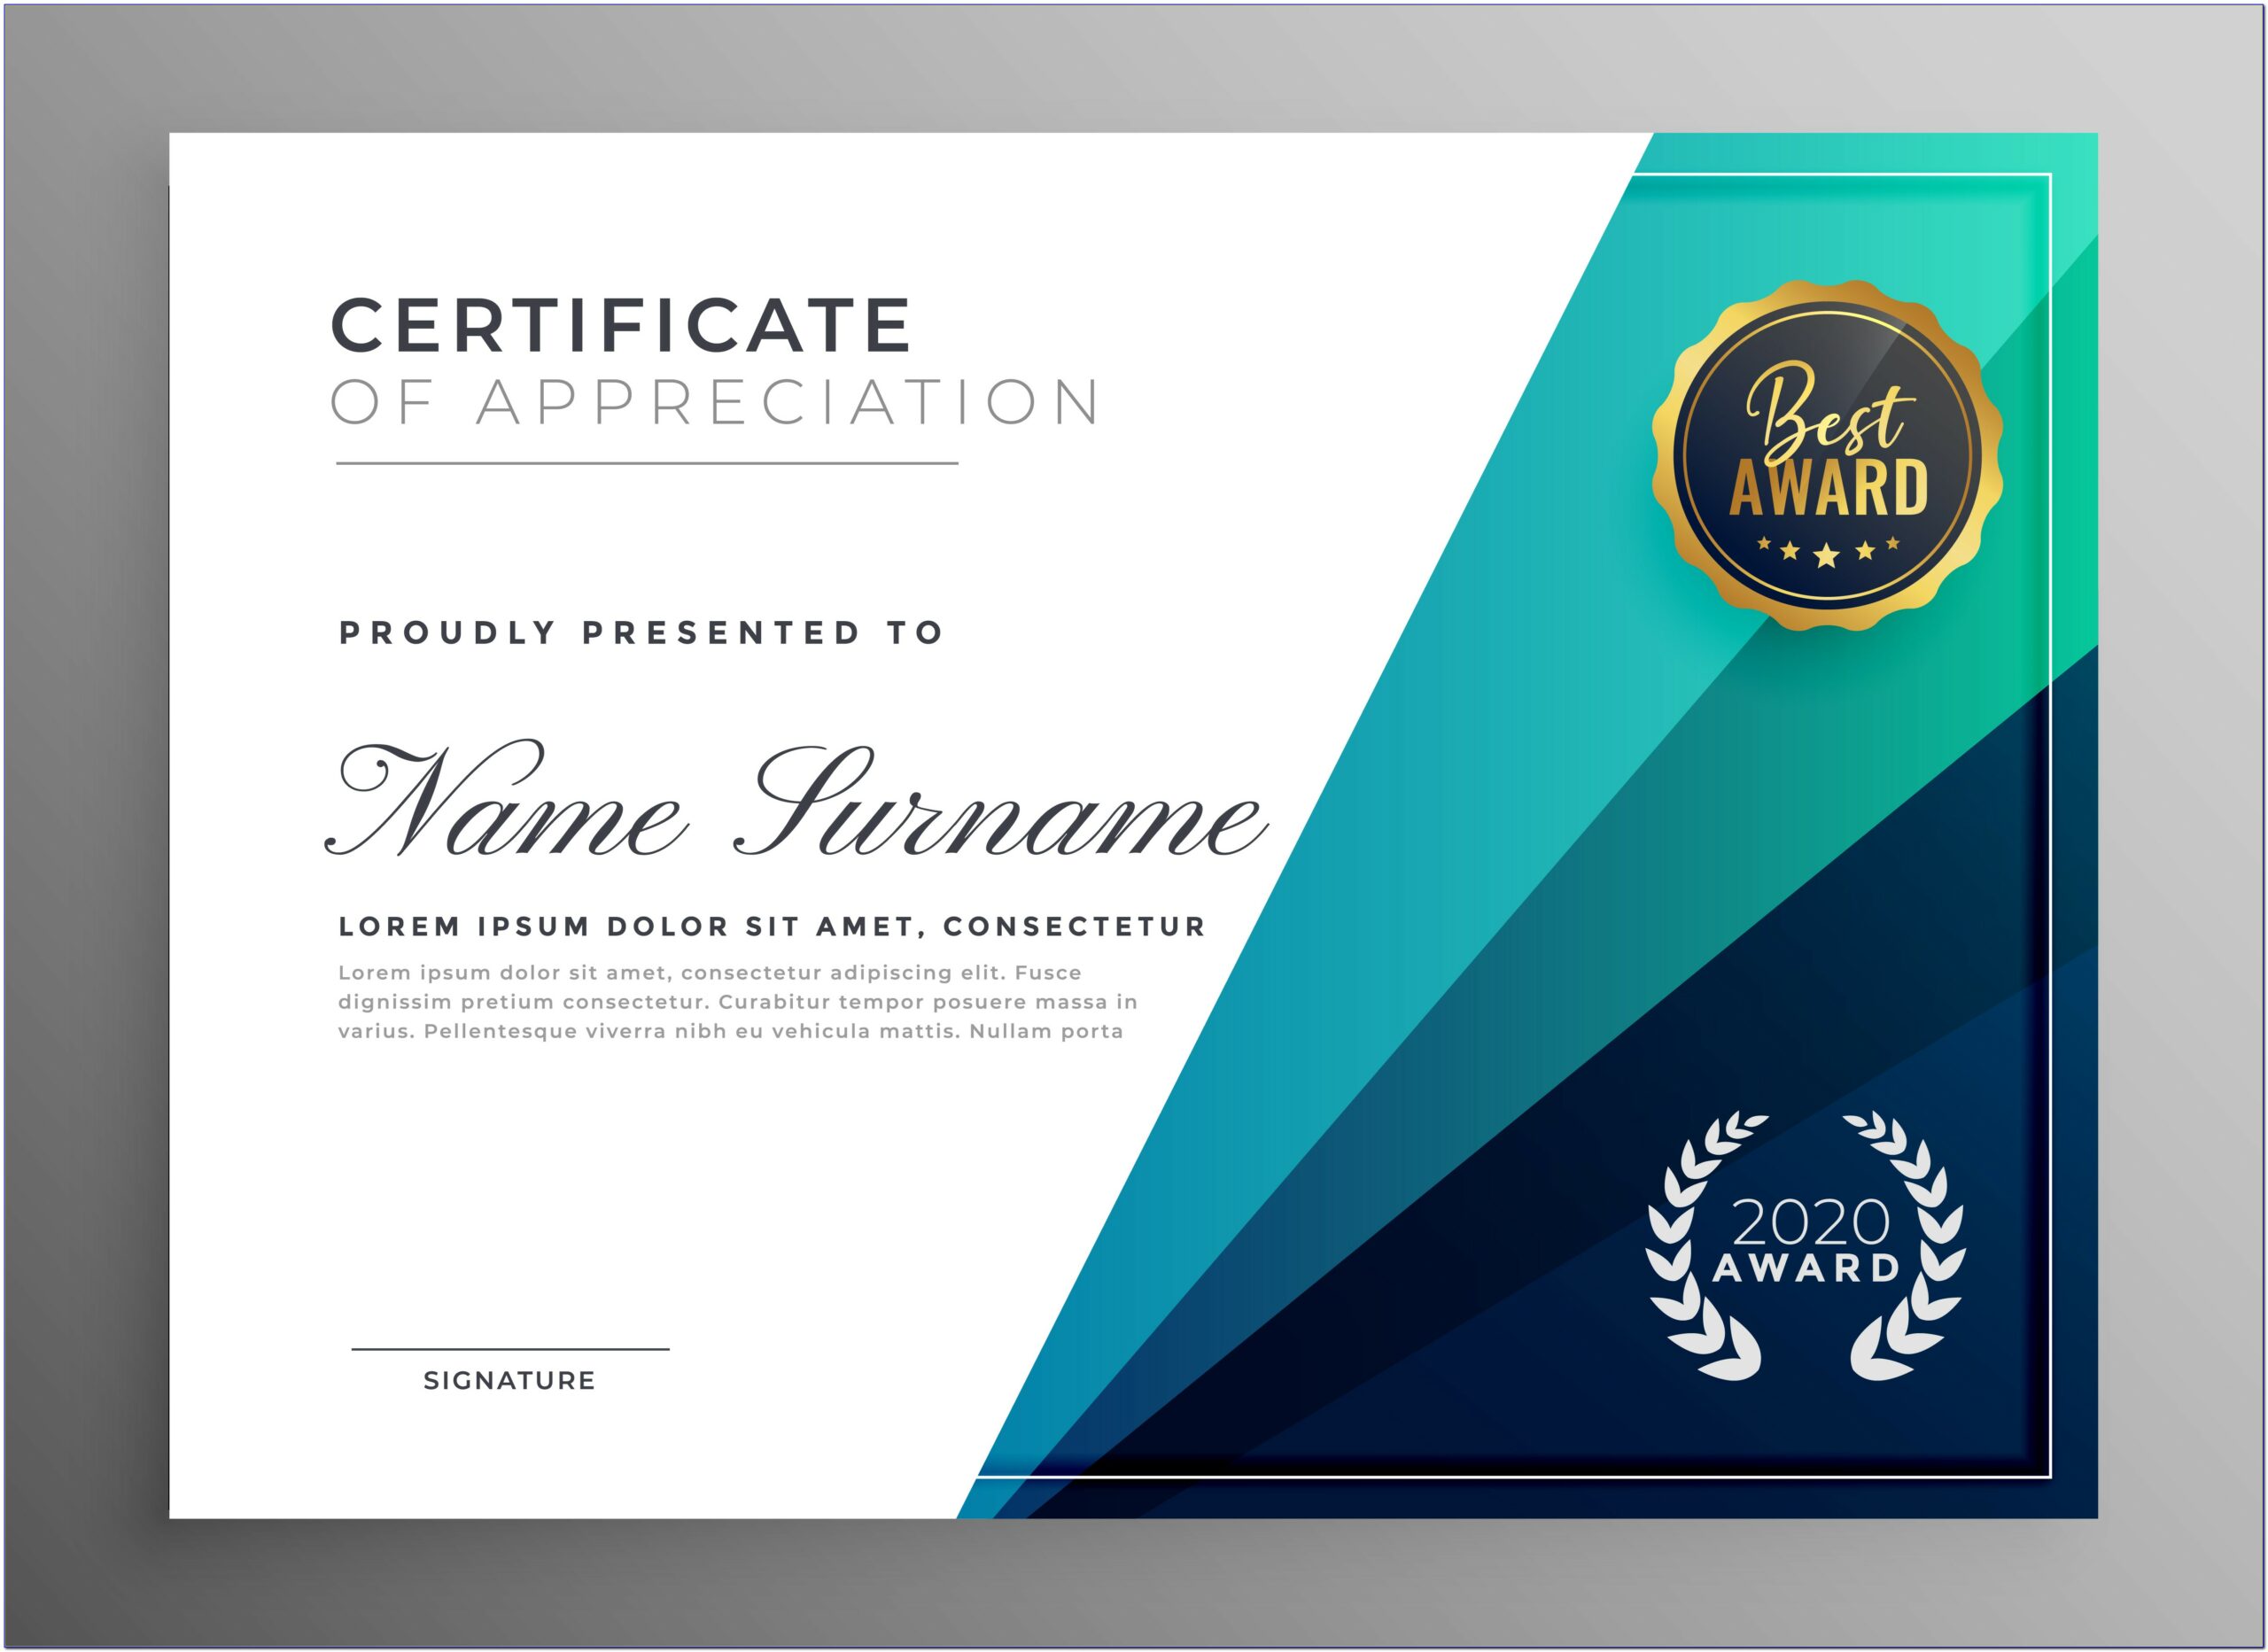 Back Of Stock Certificate Template